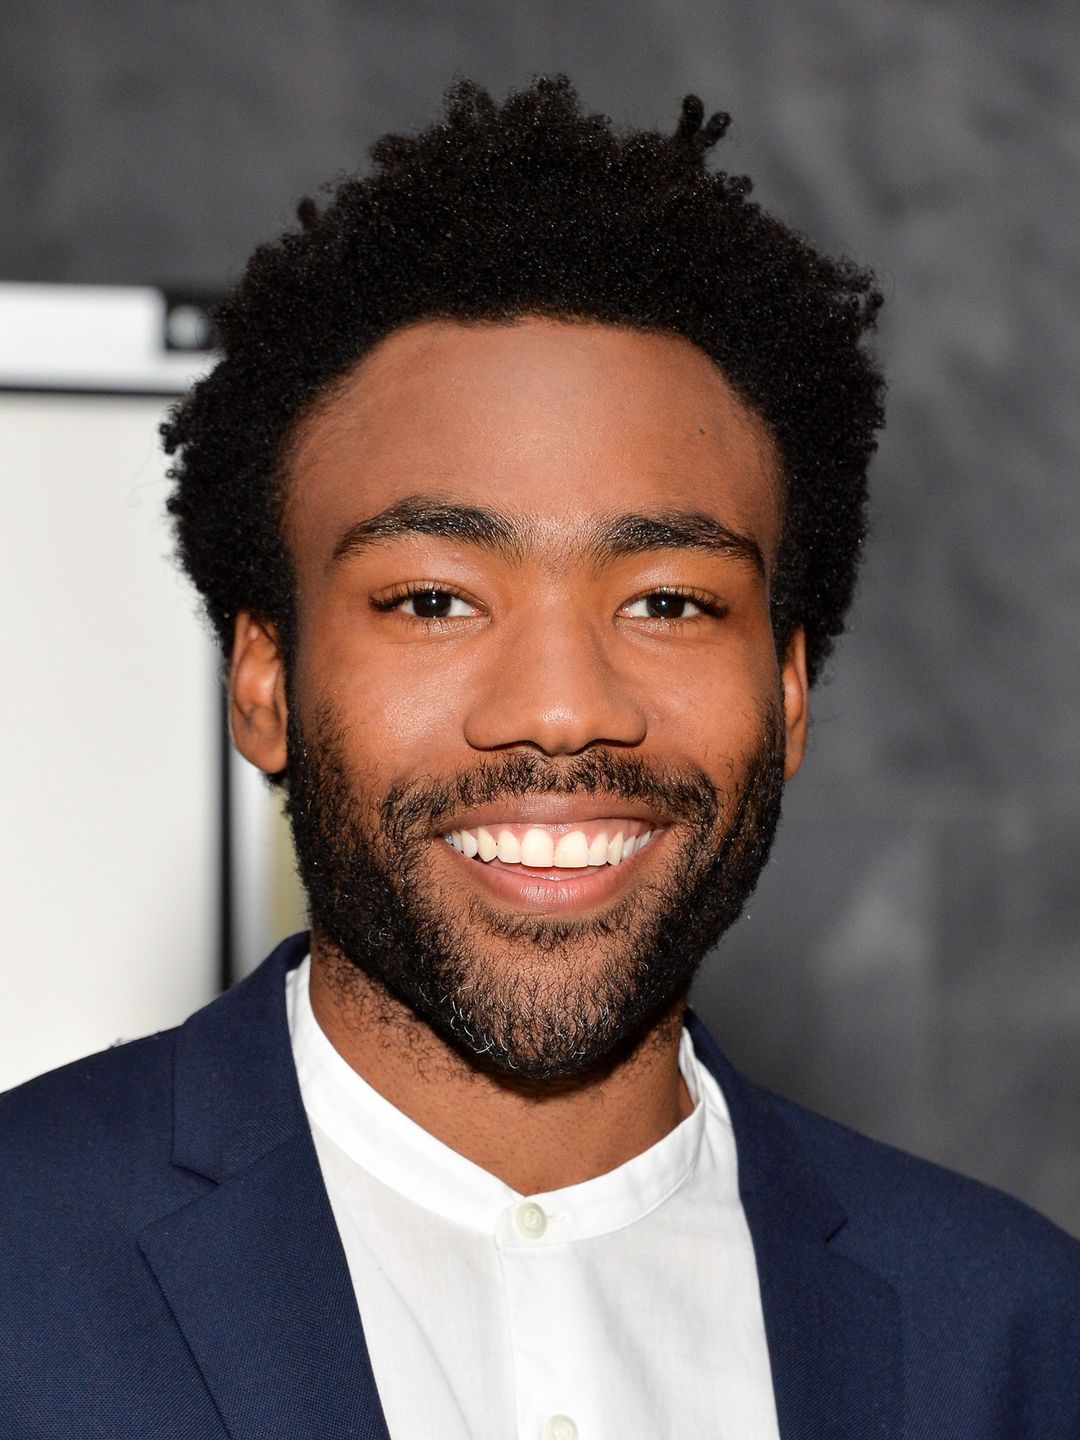 Donald Glover interesting facts